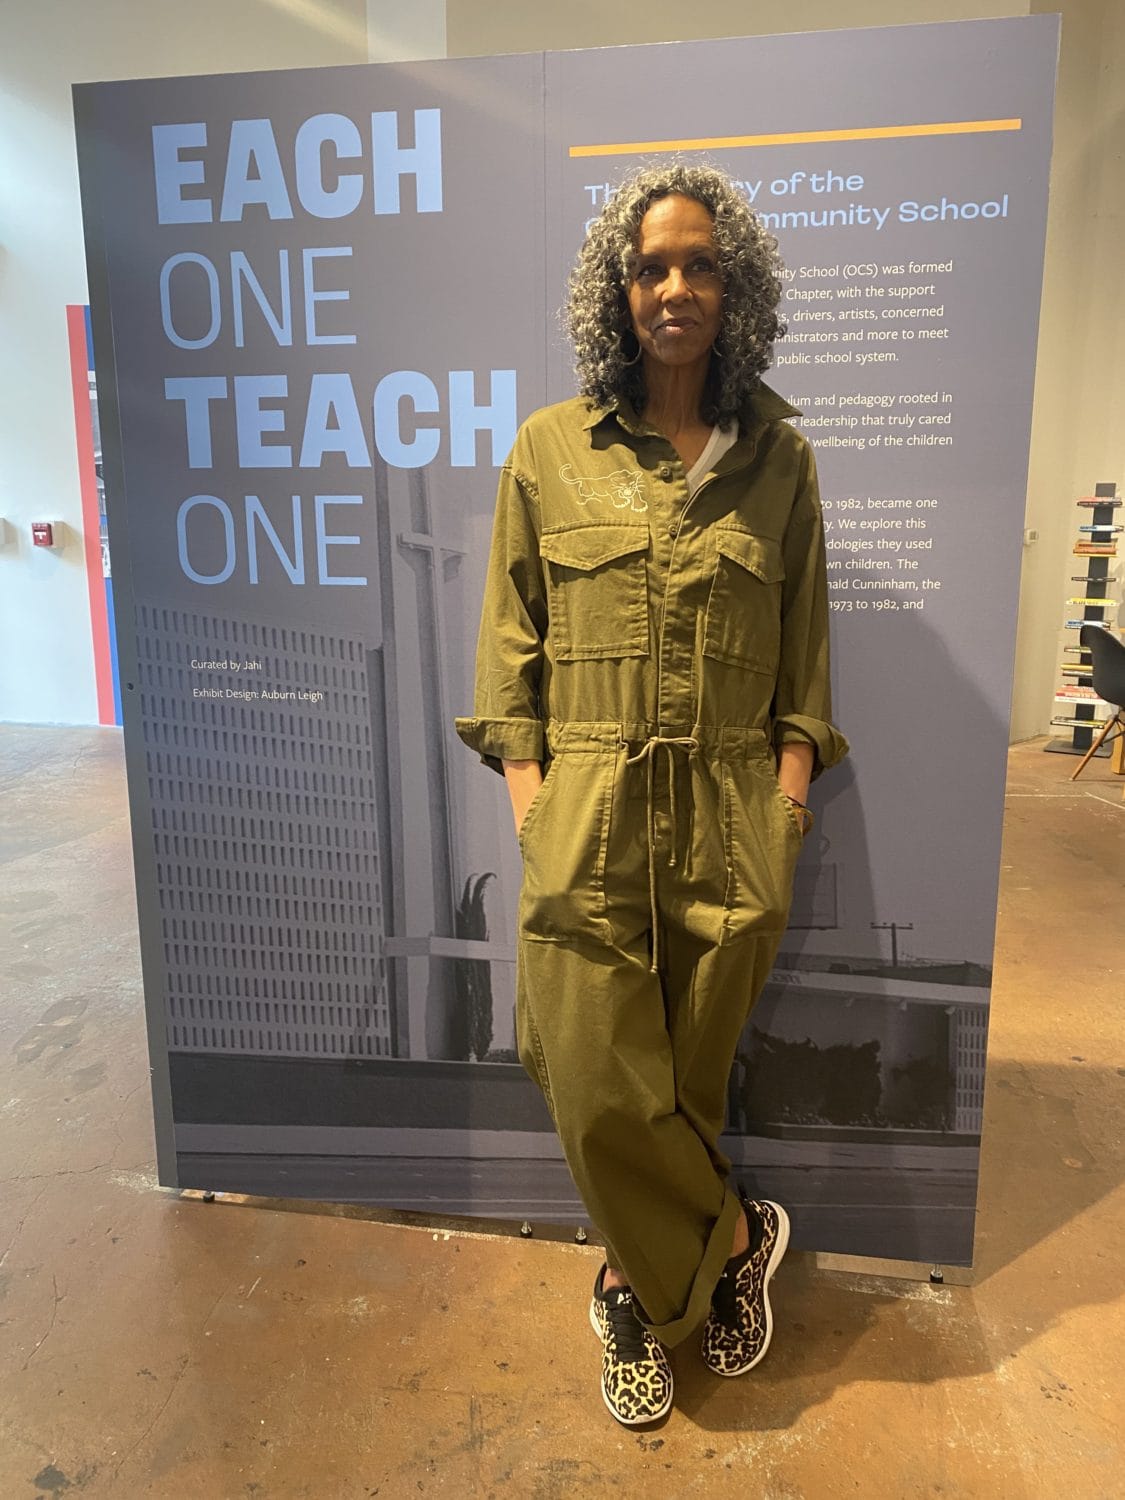 Black-Panther-Party-Museum-Fredrika-Newton-‘Each-One-Teach-One-exhibit-by-Tiffany-Caesar, The People’s Narrative: The Black Panther Party Museum in Oakland, Culture Currents Local News & Views 